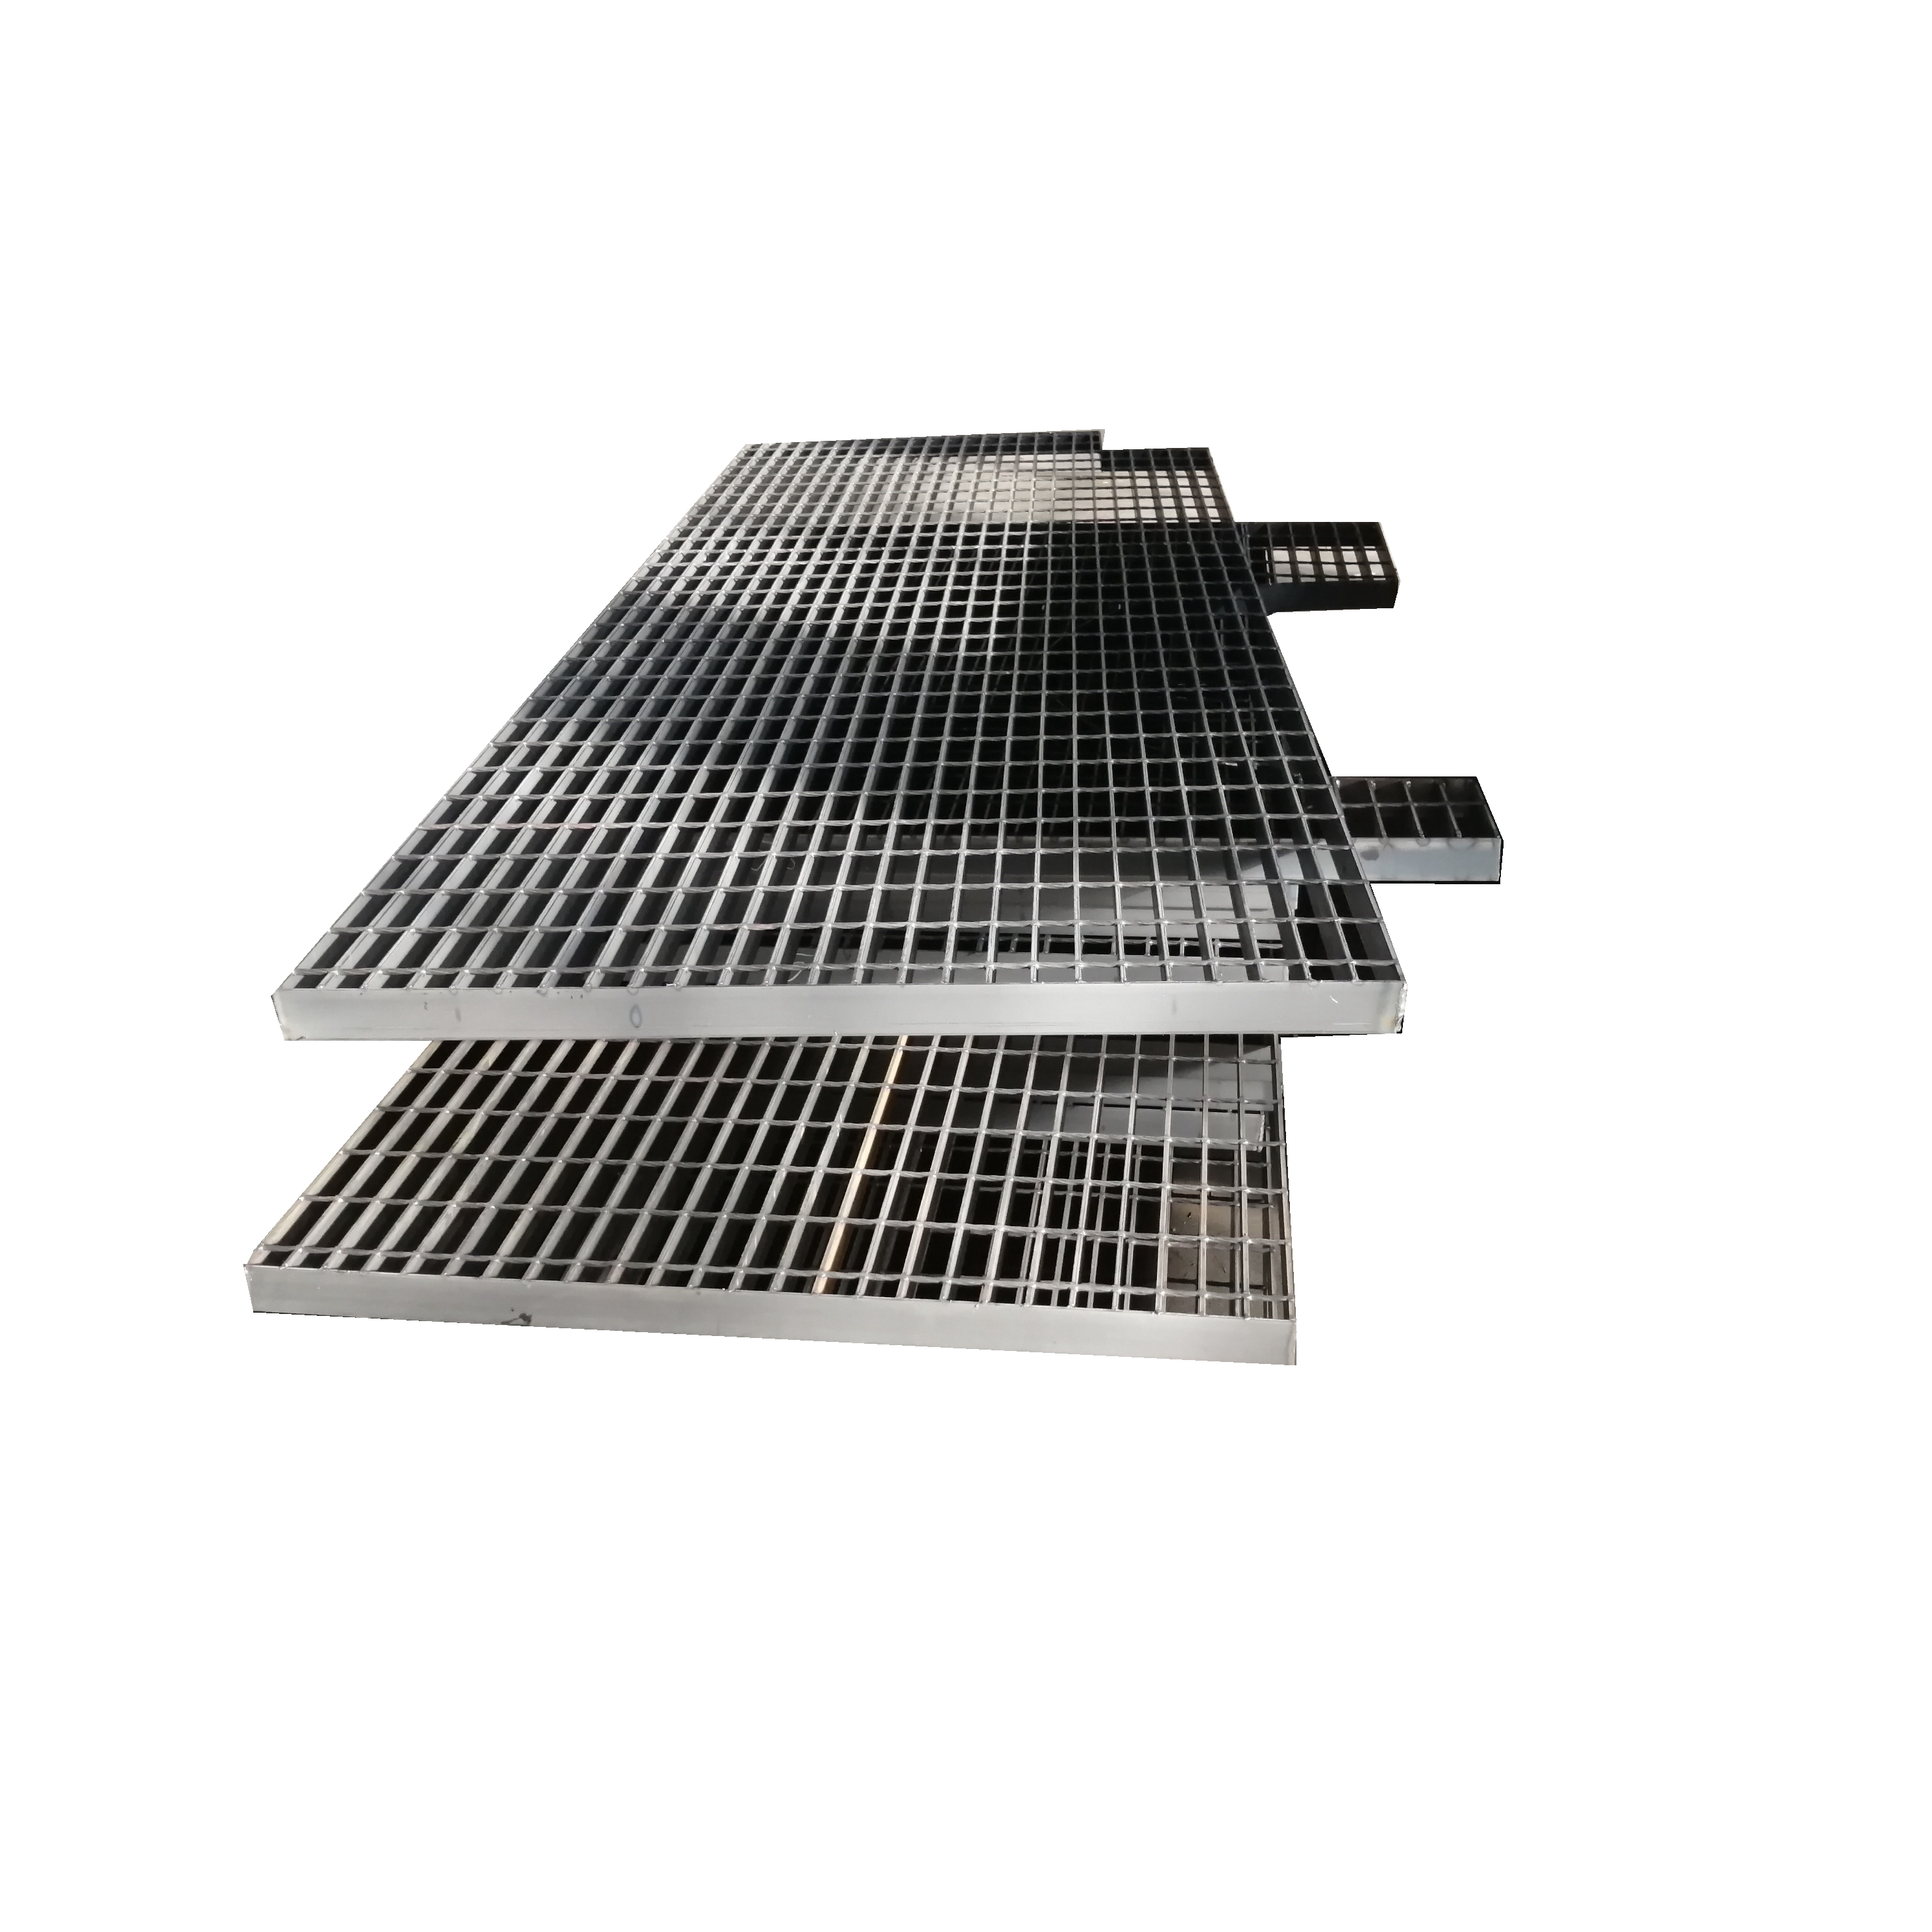 Well-designed Stainless SteelManufacturers - I 32 Stainless Galvanized Mild Standard Prices Weight Size Steel Grating  – Xiantang